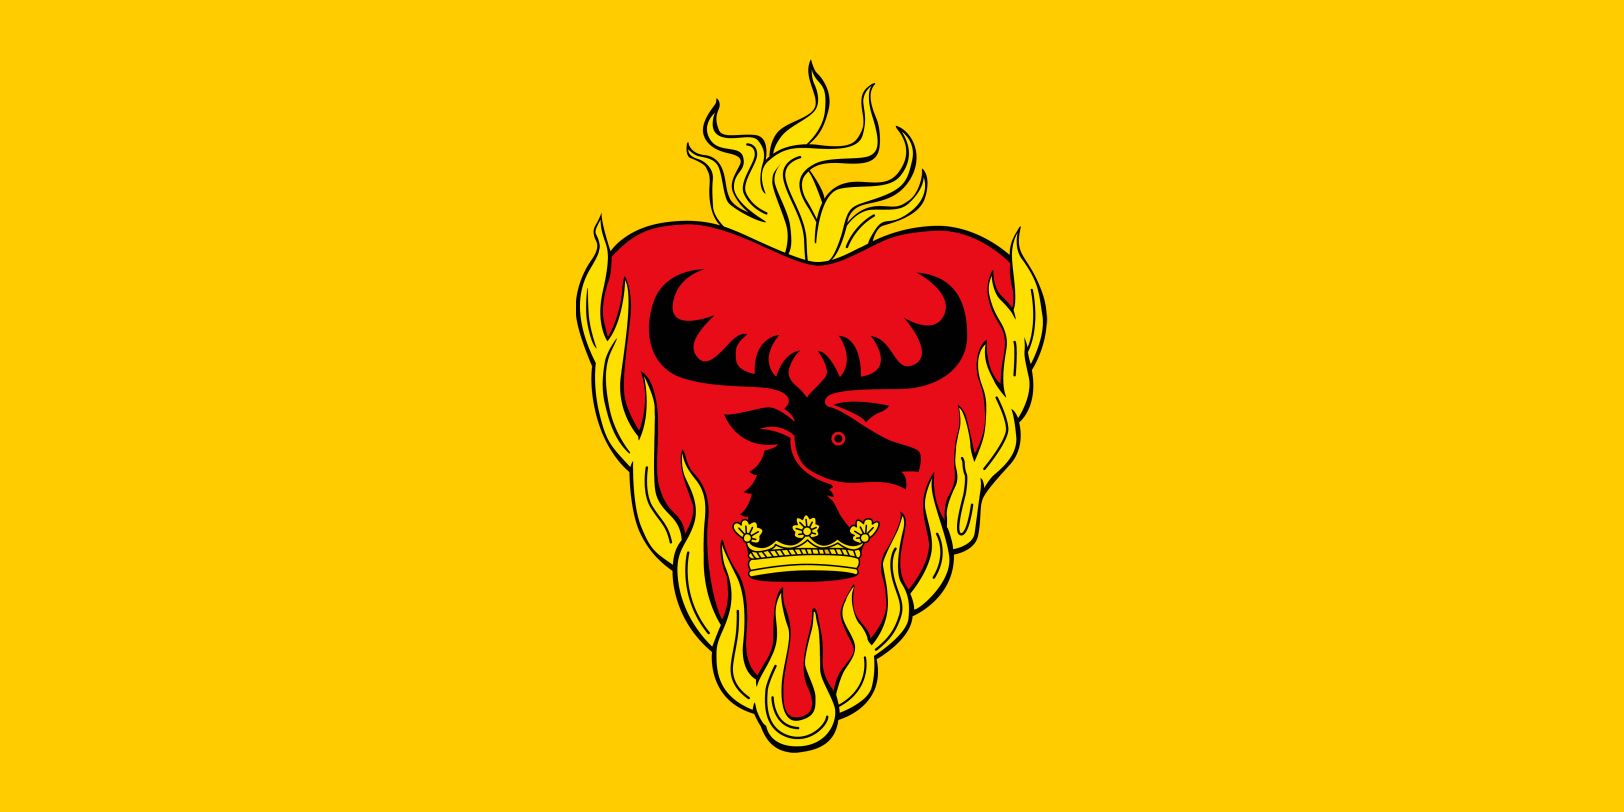 Flag of Stannis Baratheon in Game of Thrones